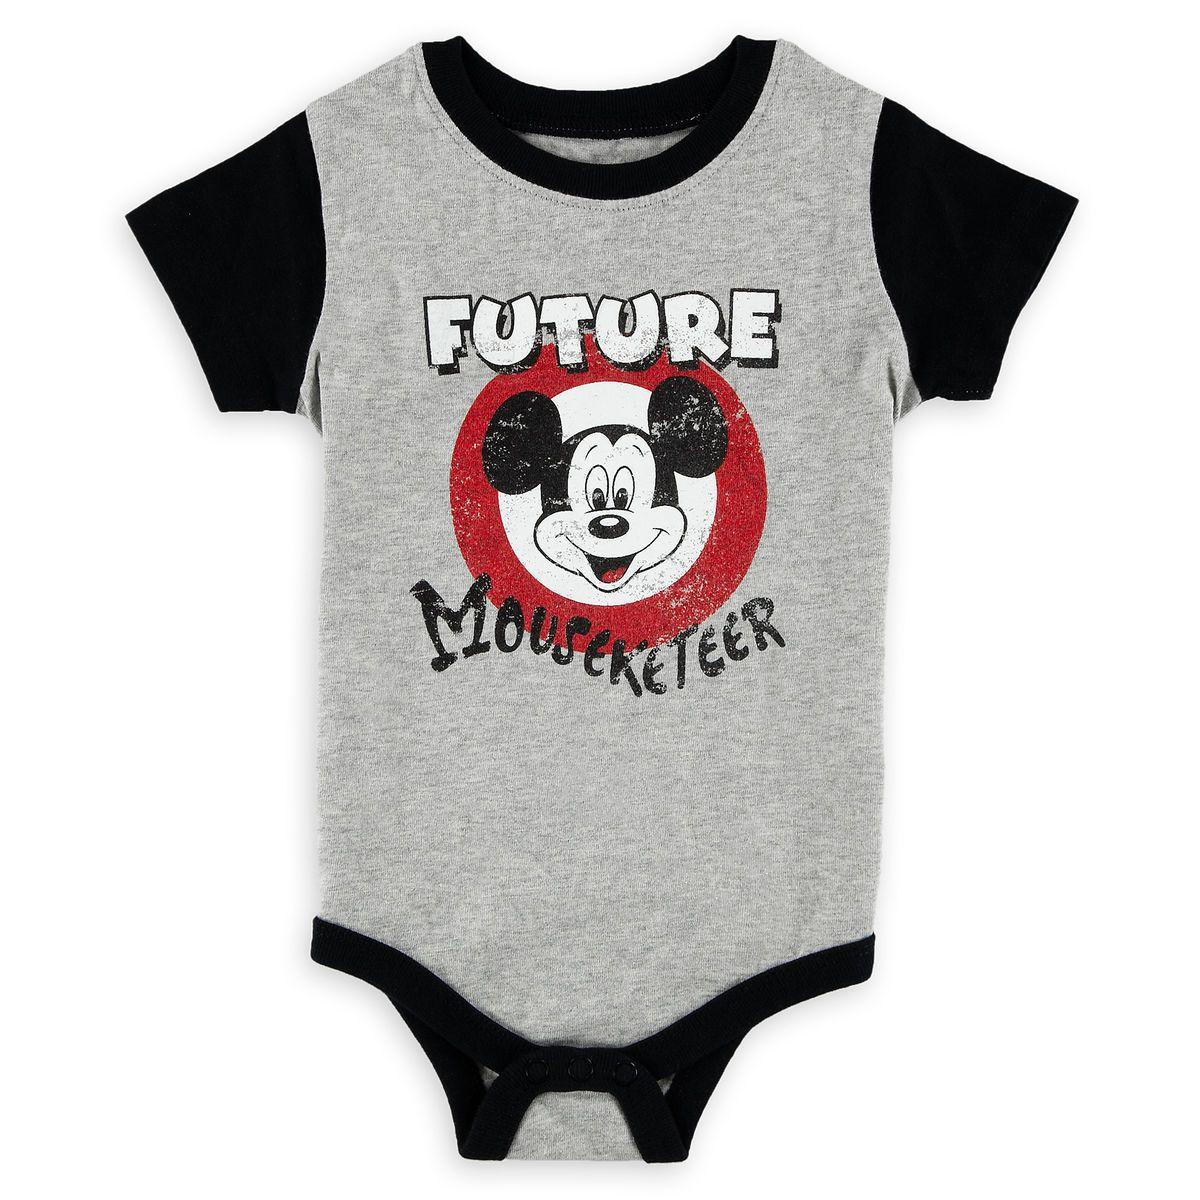 Mouseketeer Logo - Disney Bodysuit for Baby - Mickey Mouse Club - Future Mouseketeer